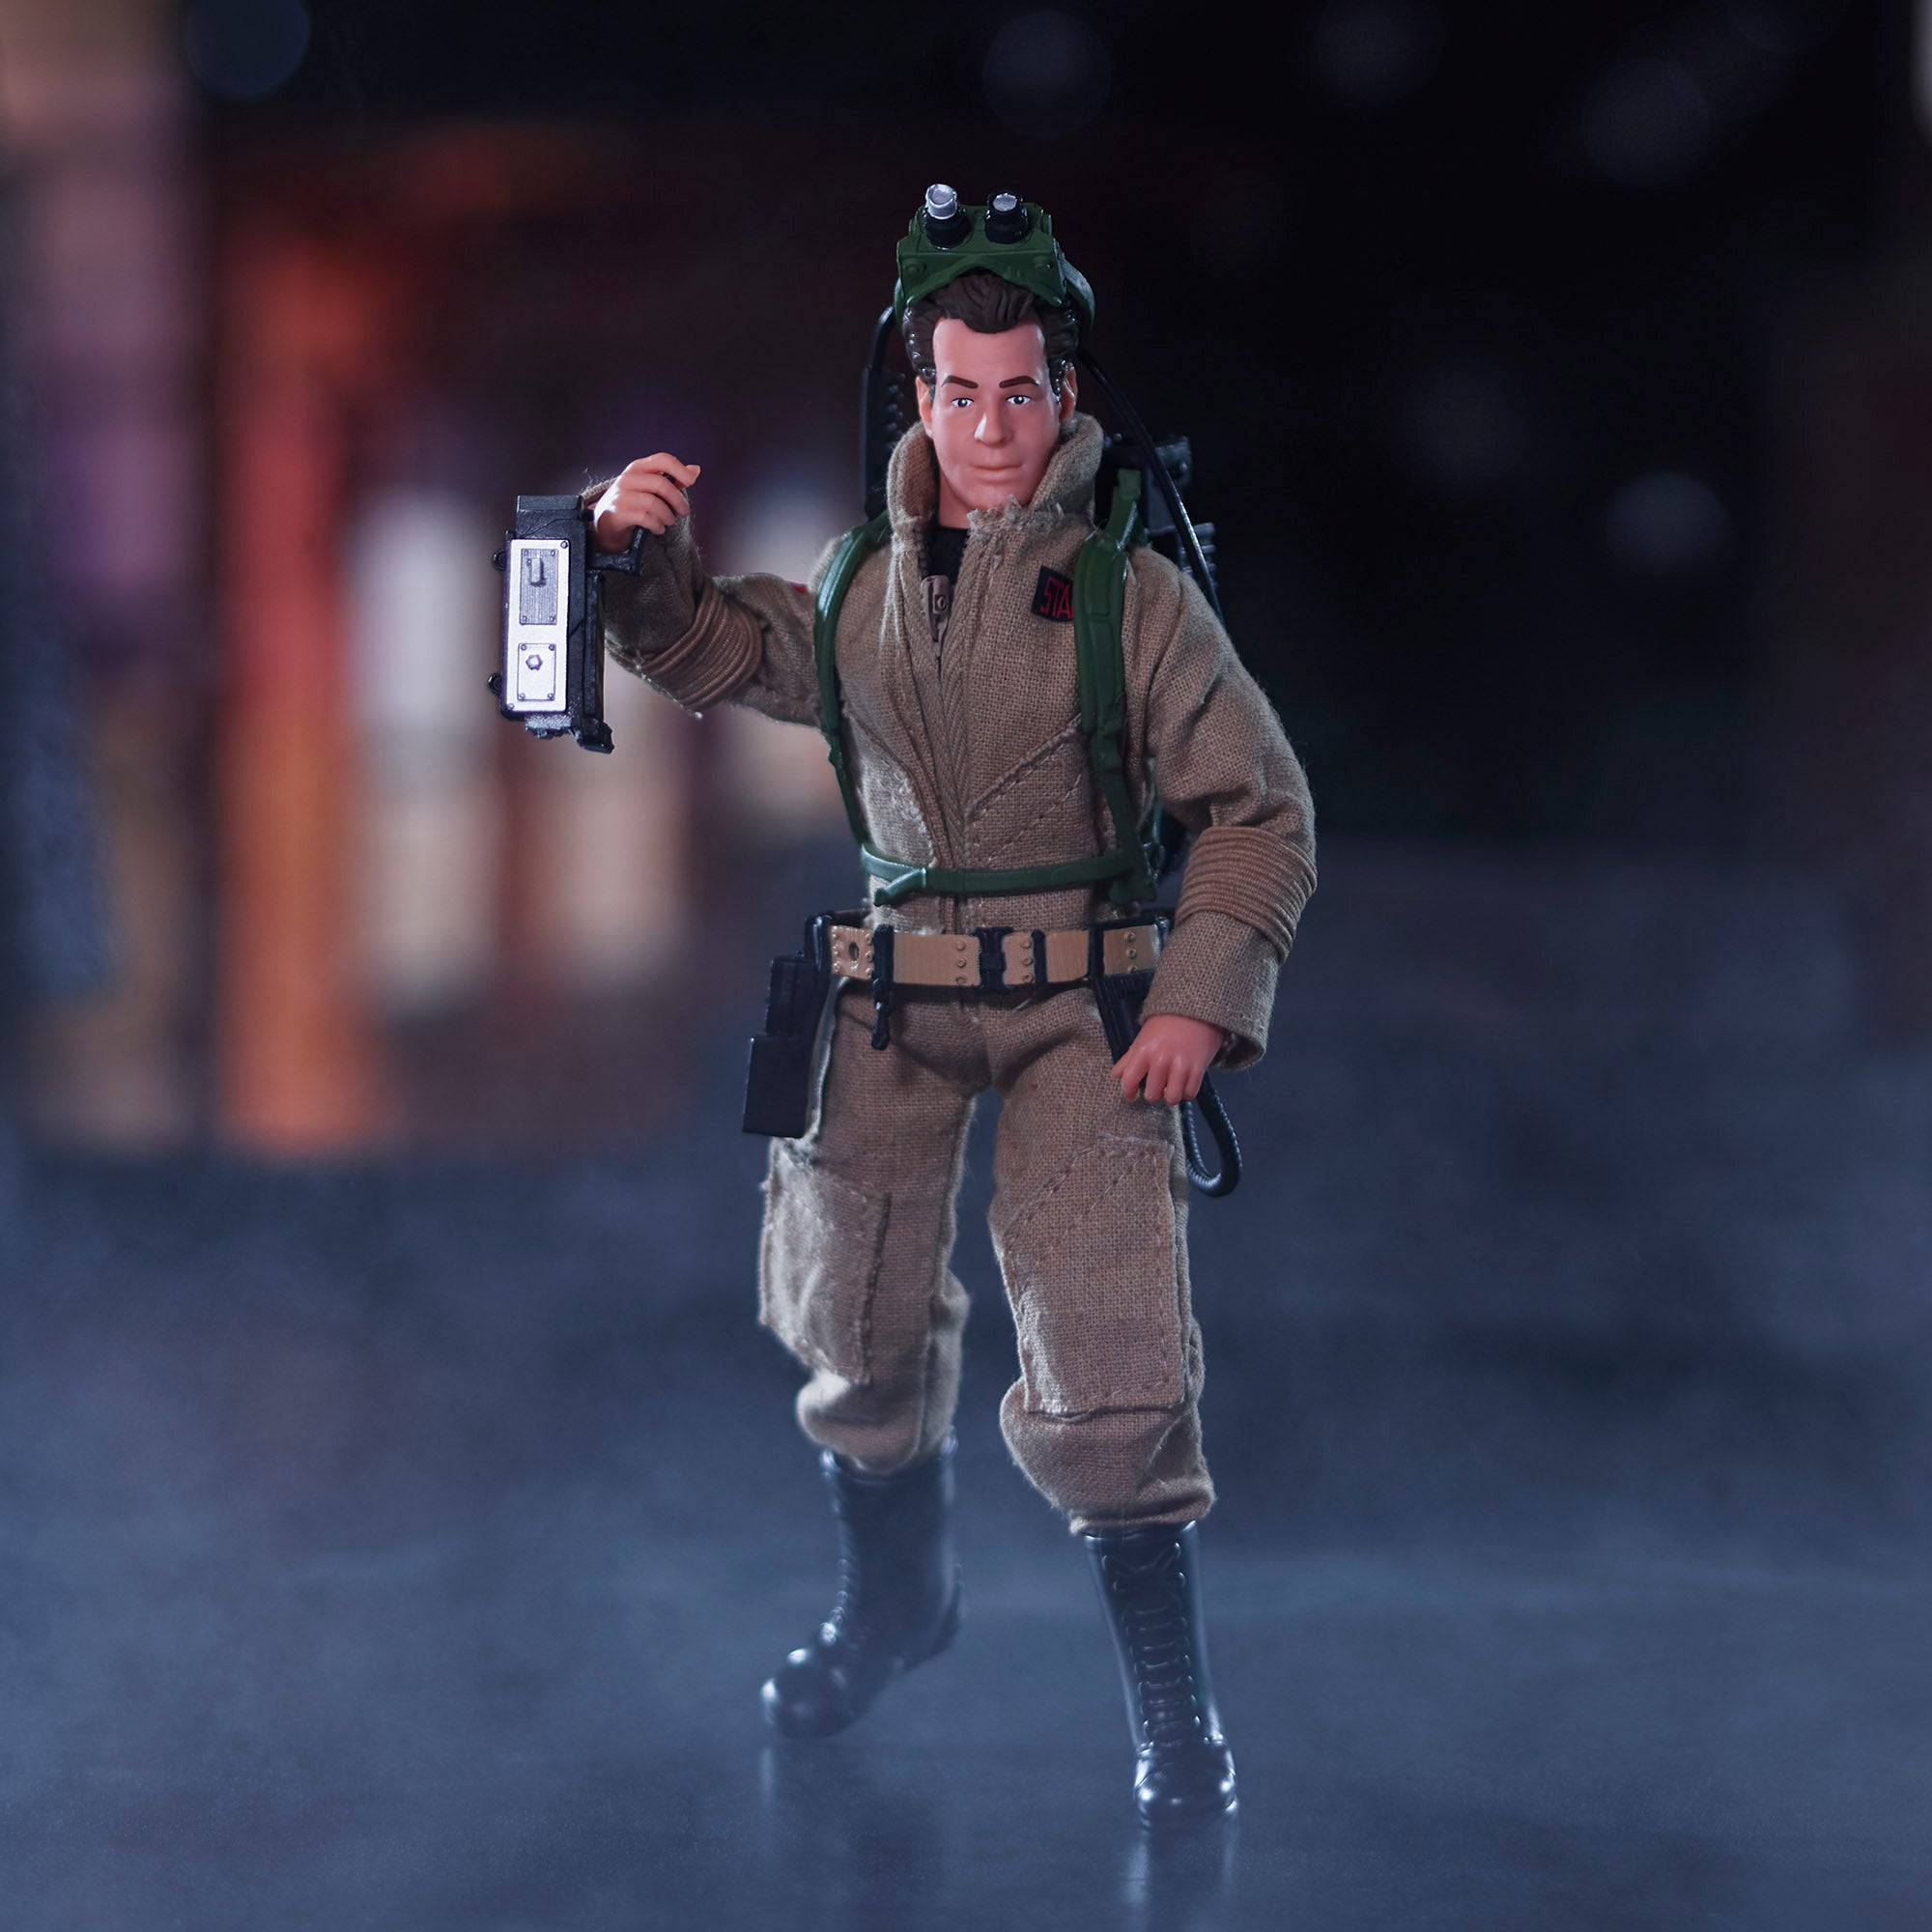 Ghostbusters x Mego 3